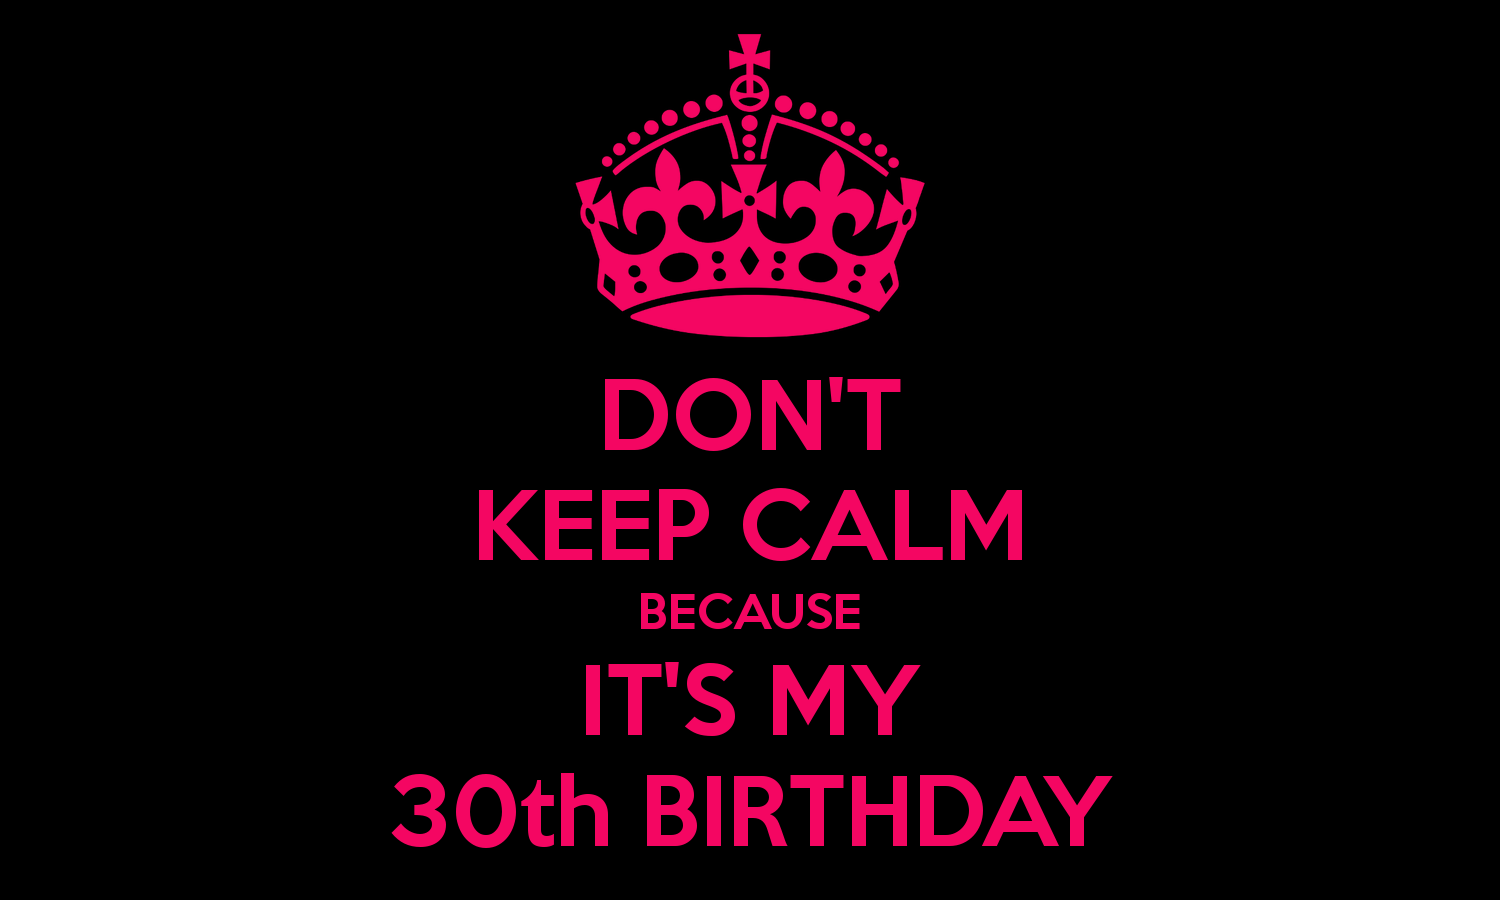 Its My 30th Birthday Quotes.